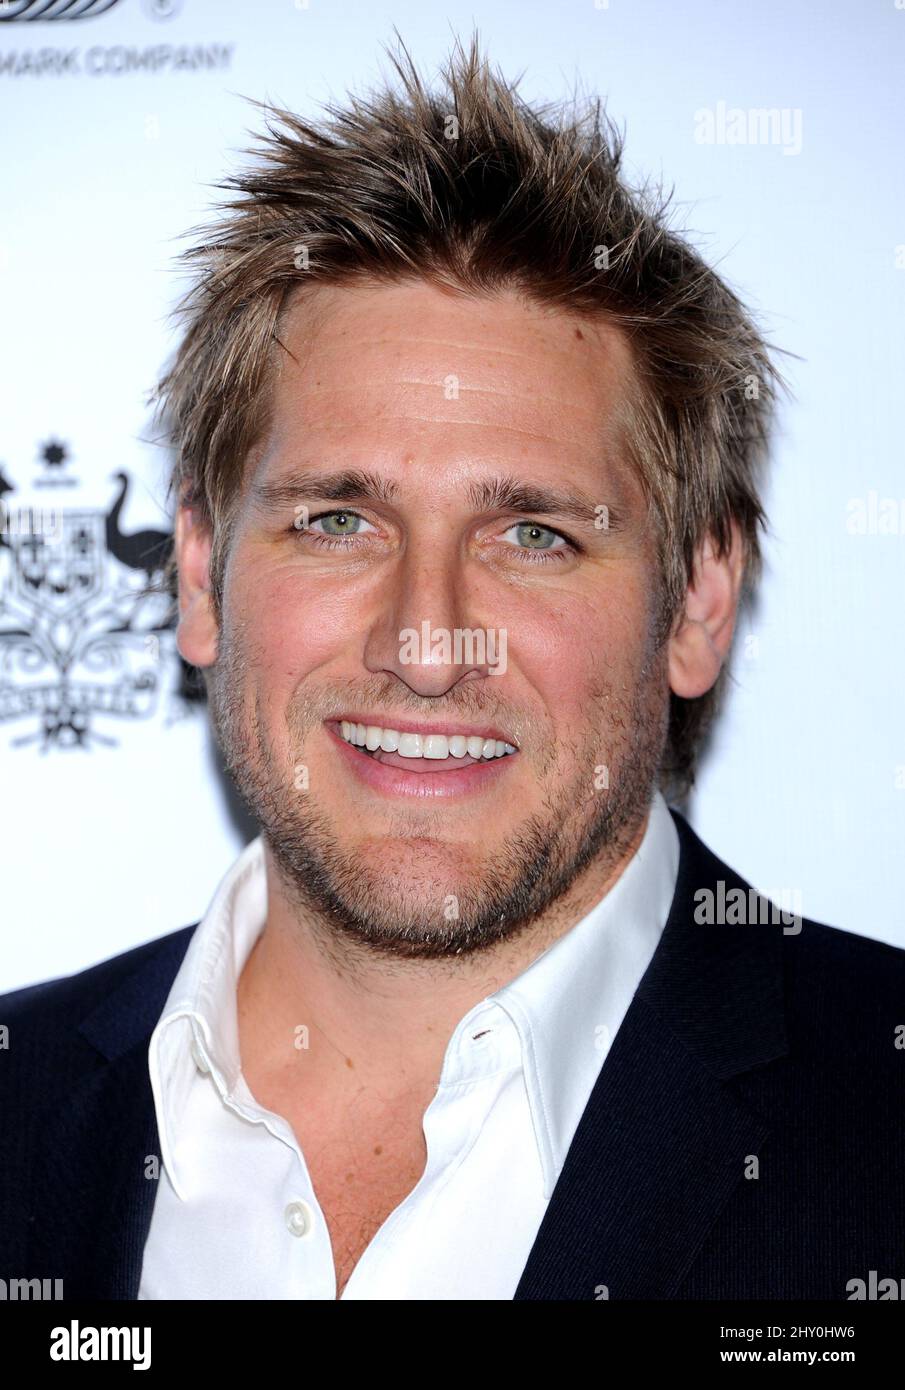 https://c8.alamy.com/comp/2HY0HW6/curtis-stone-attending-the-2013-gday-usa-black-tie-gala-to-honor-australians-in-los-angeles-california-2HY0HW6.jpg